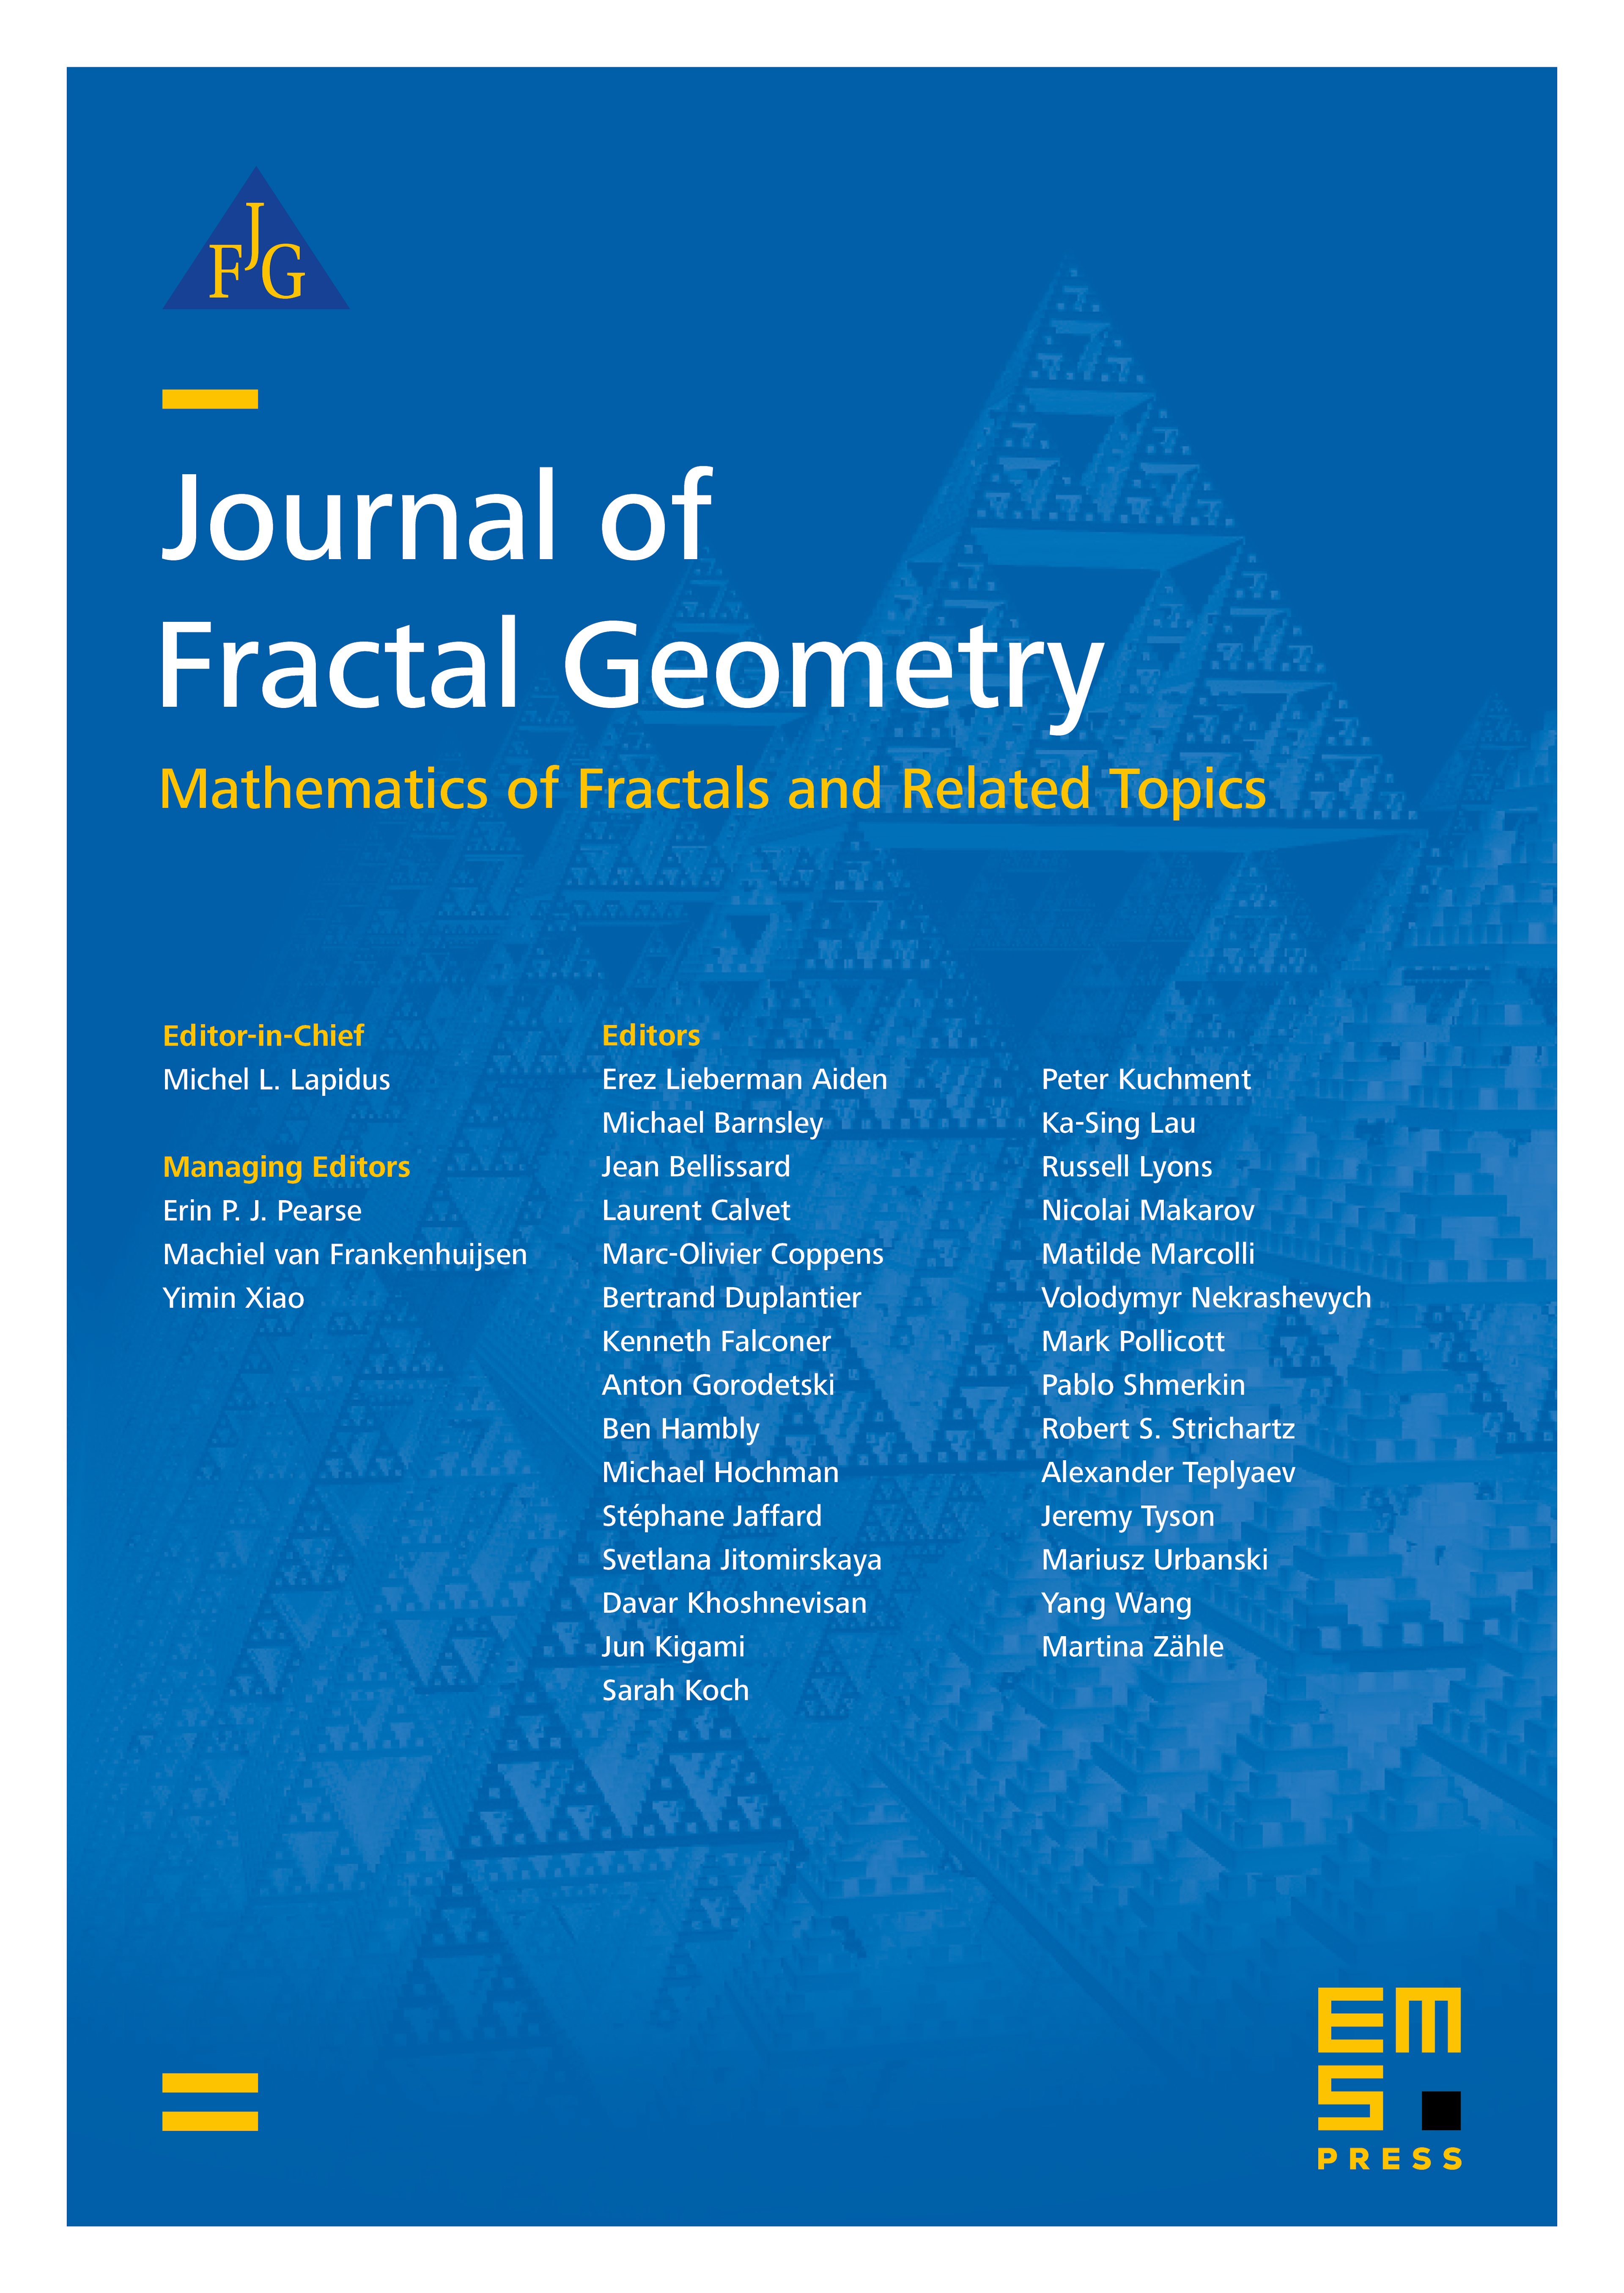 Baker domains and non-convergent deformations cover